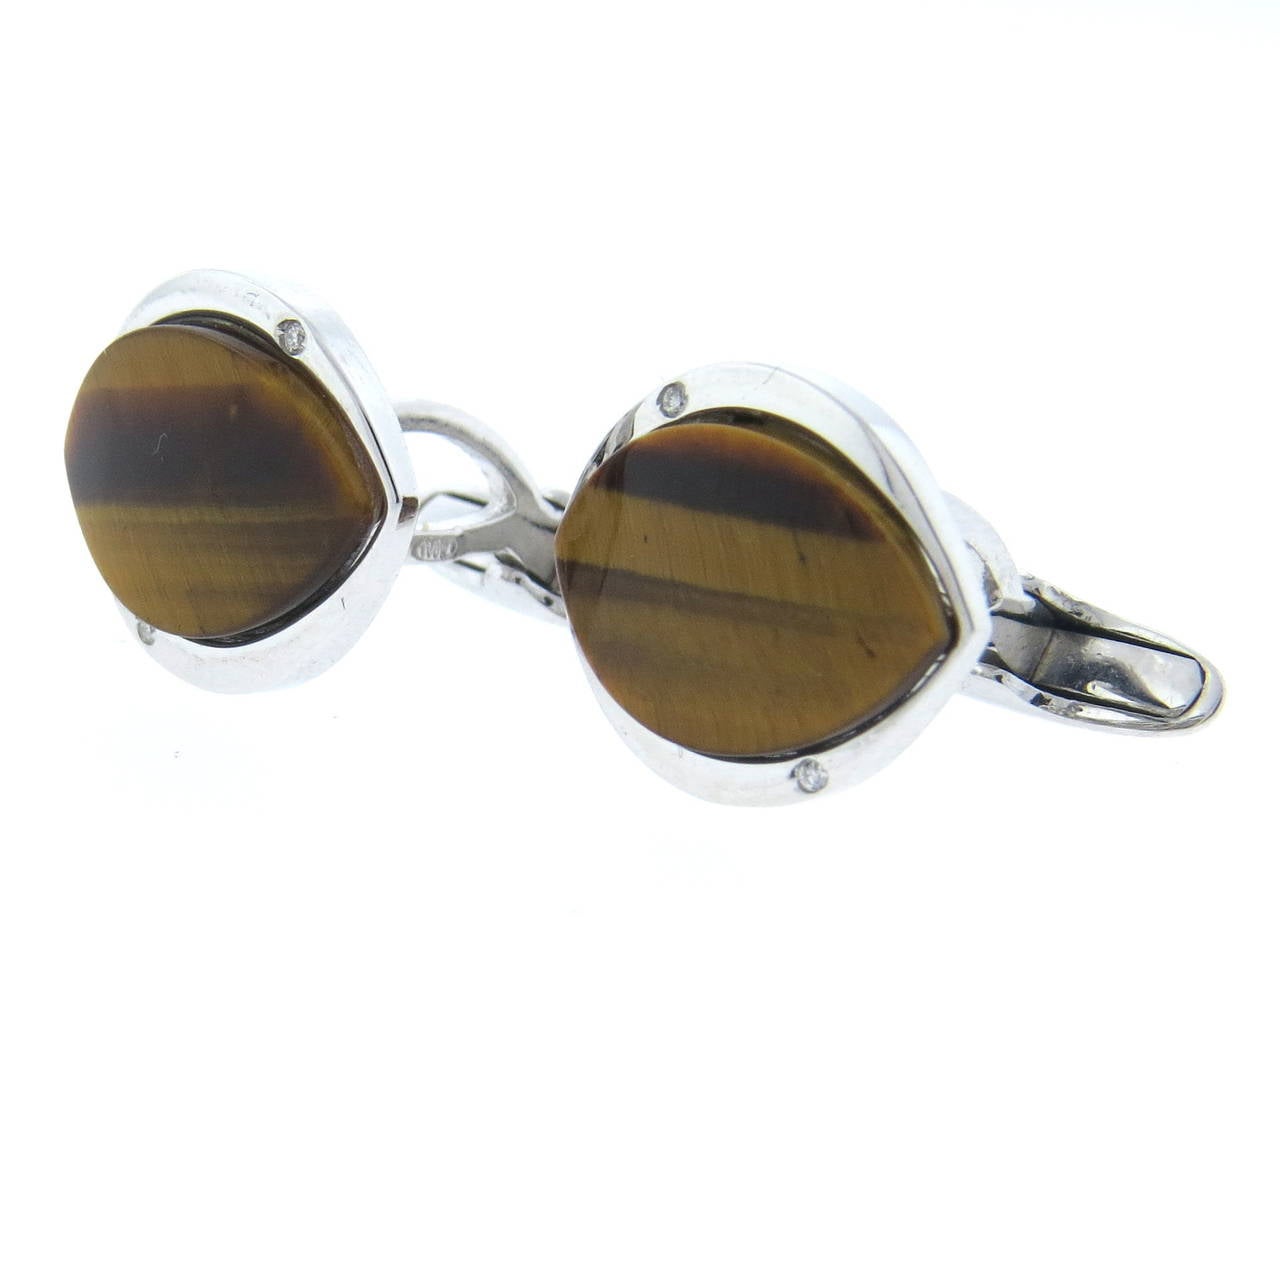 18k gold cufflinks with tiger's eye and diamonds , top measure 16mm x 14mm.  Weight - 8.2 grams